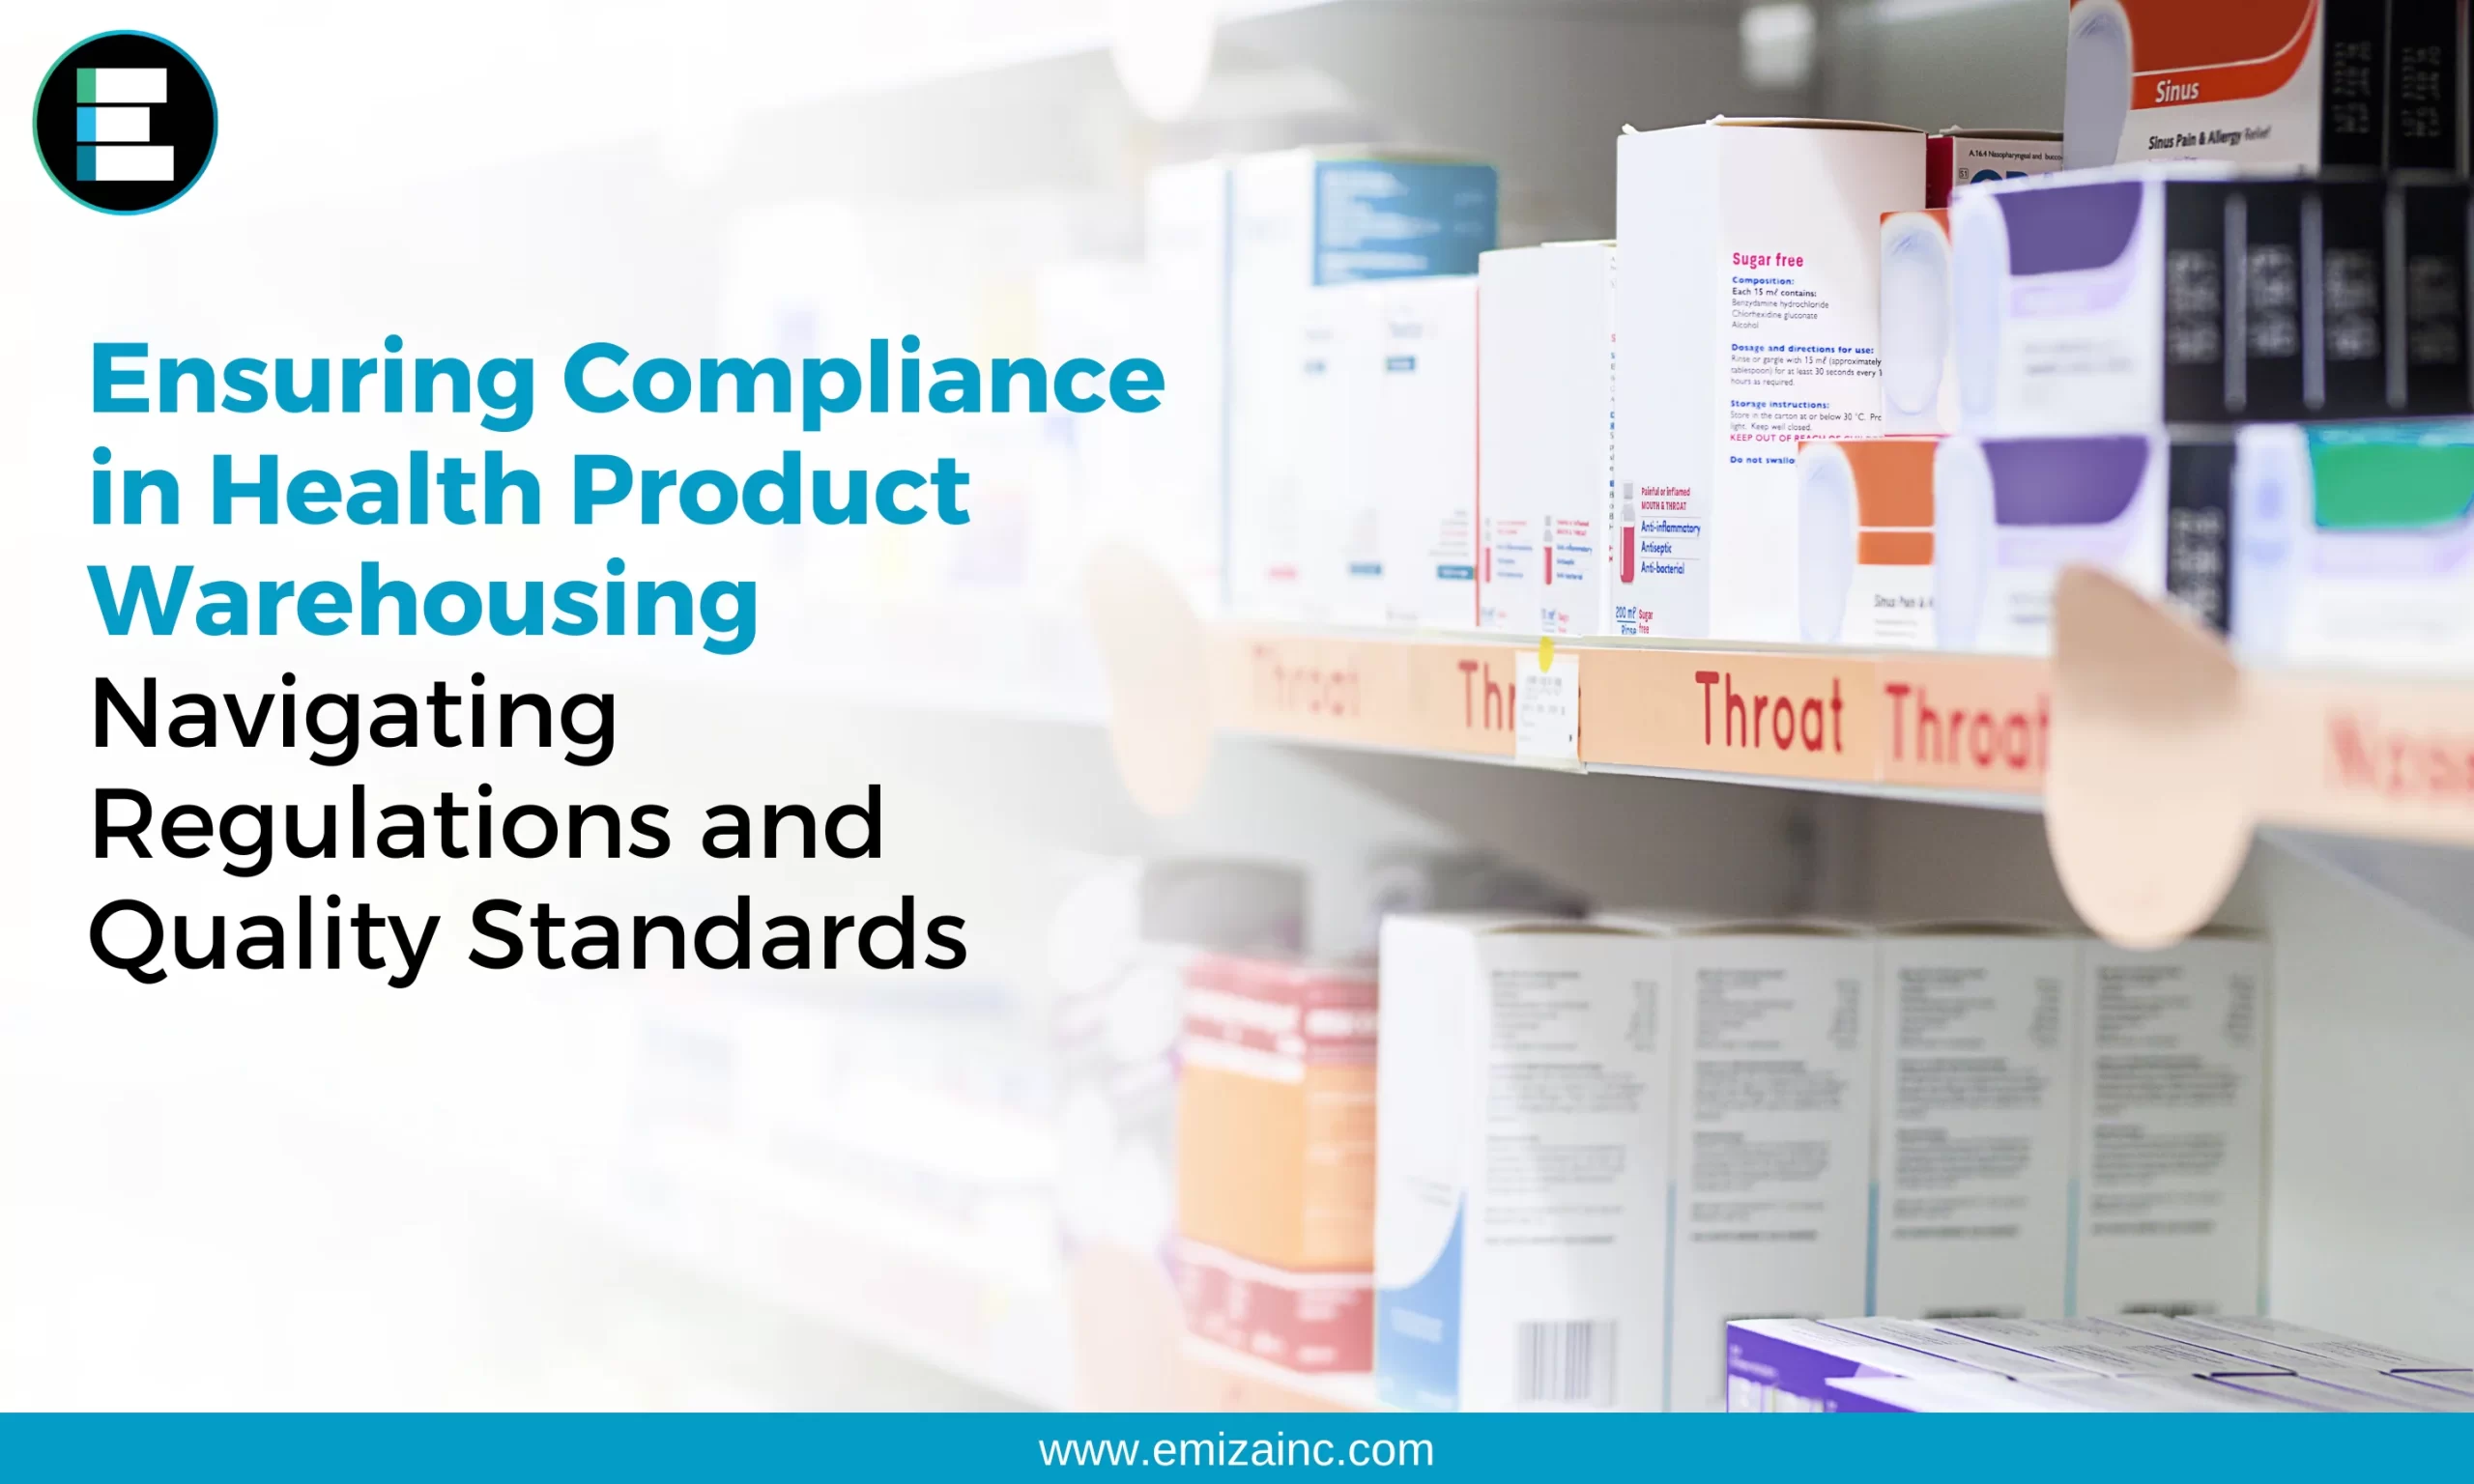 Ensuring Compliance in Health Product Warehousing: Navigating Regulations and Quality Standards